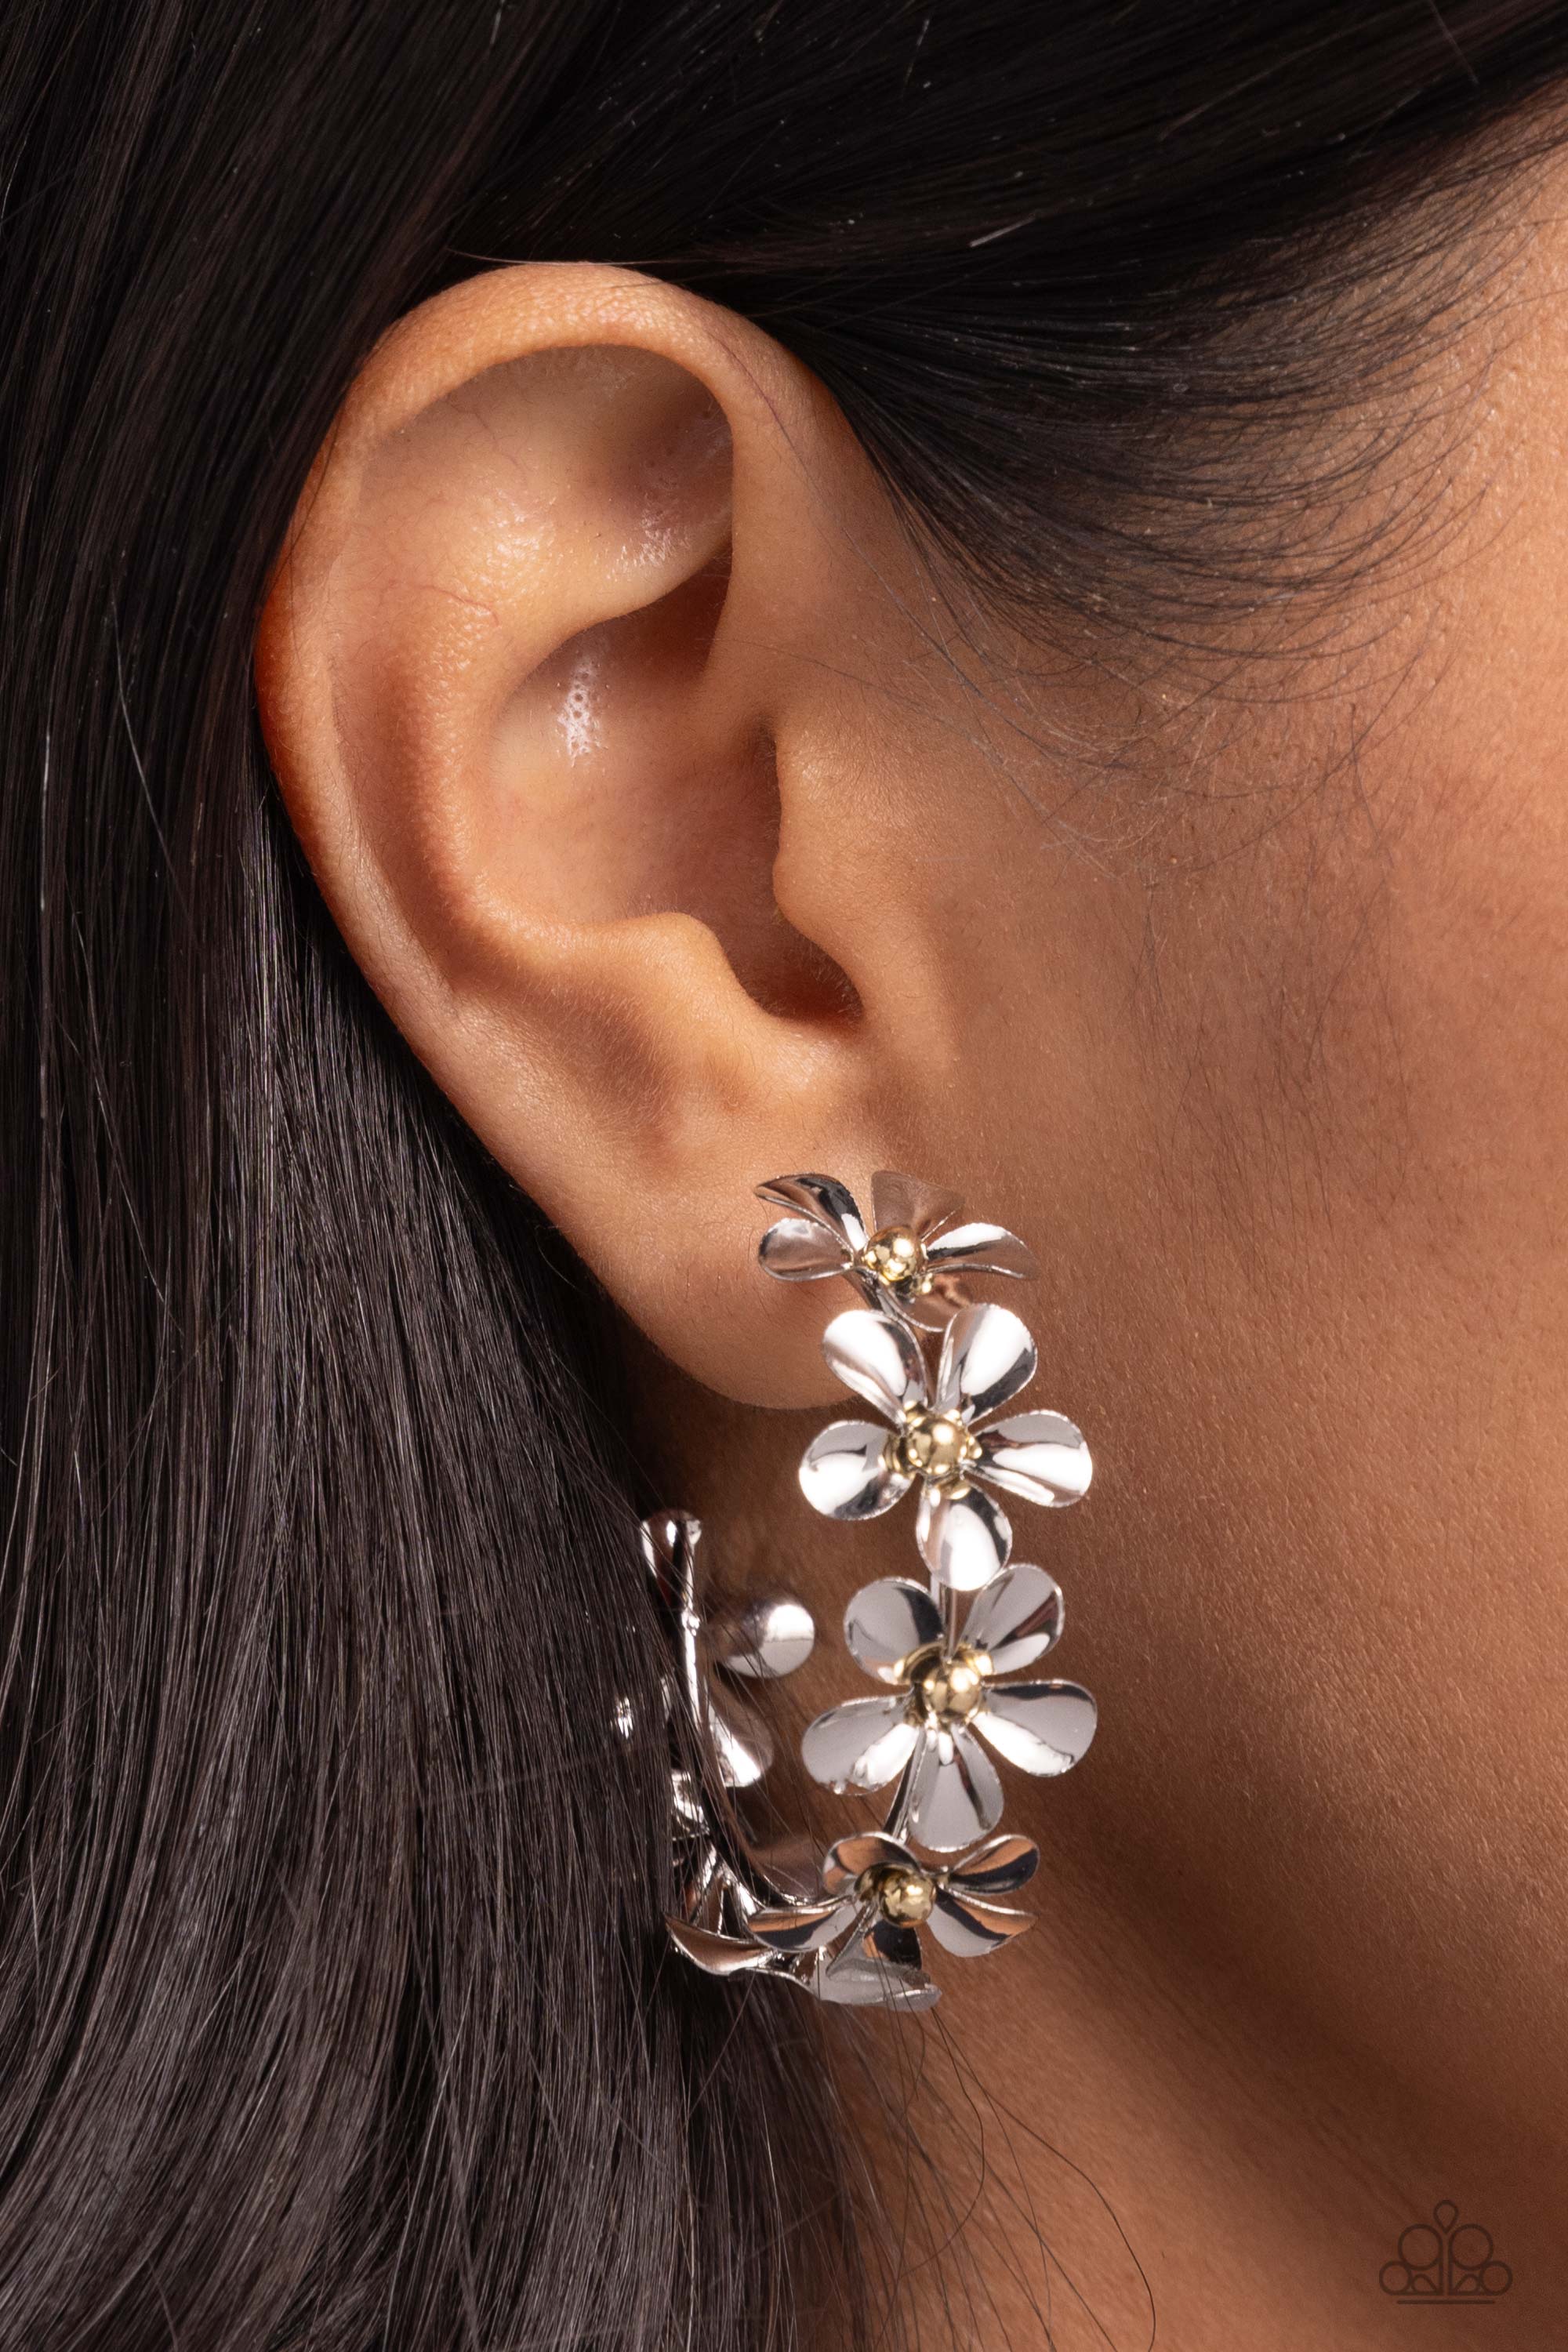 Floral Flamenco Silver Flower Hoop Earrings - Paparazzi Accessories-on model - CarasShop.com - $5 Jewelry by Cara Jewels